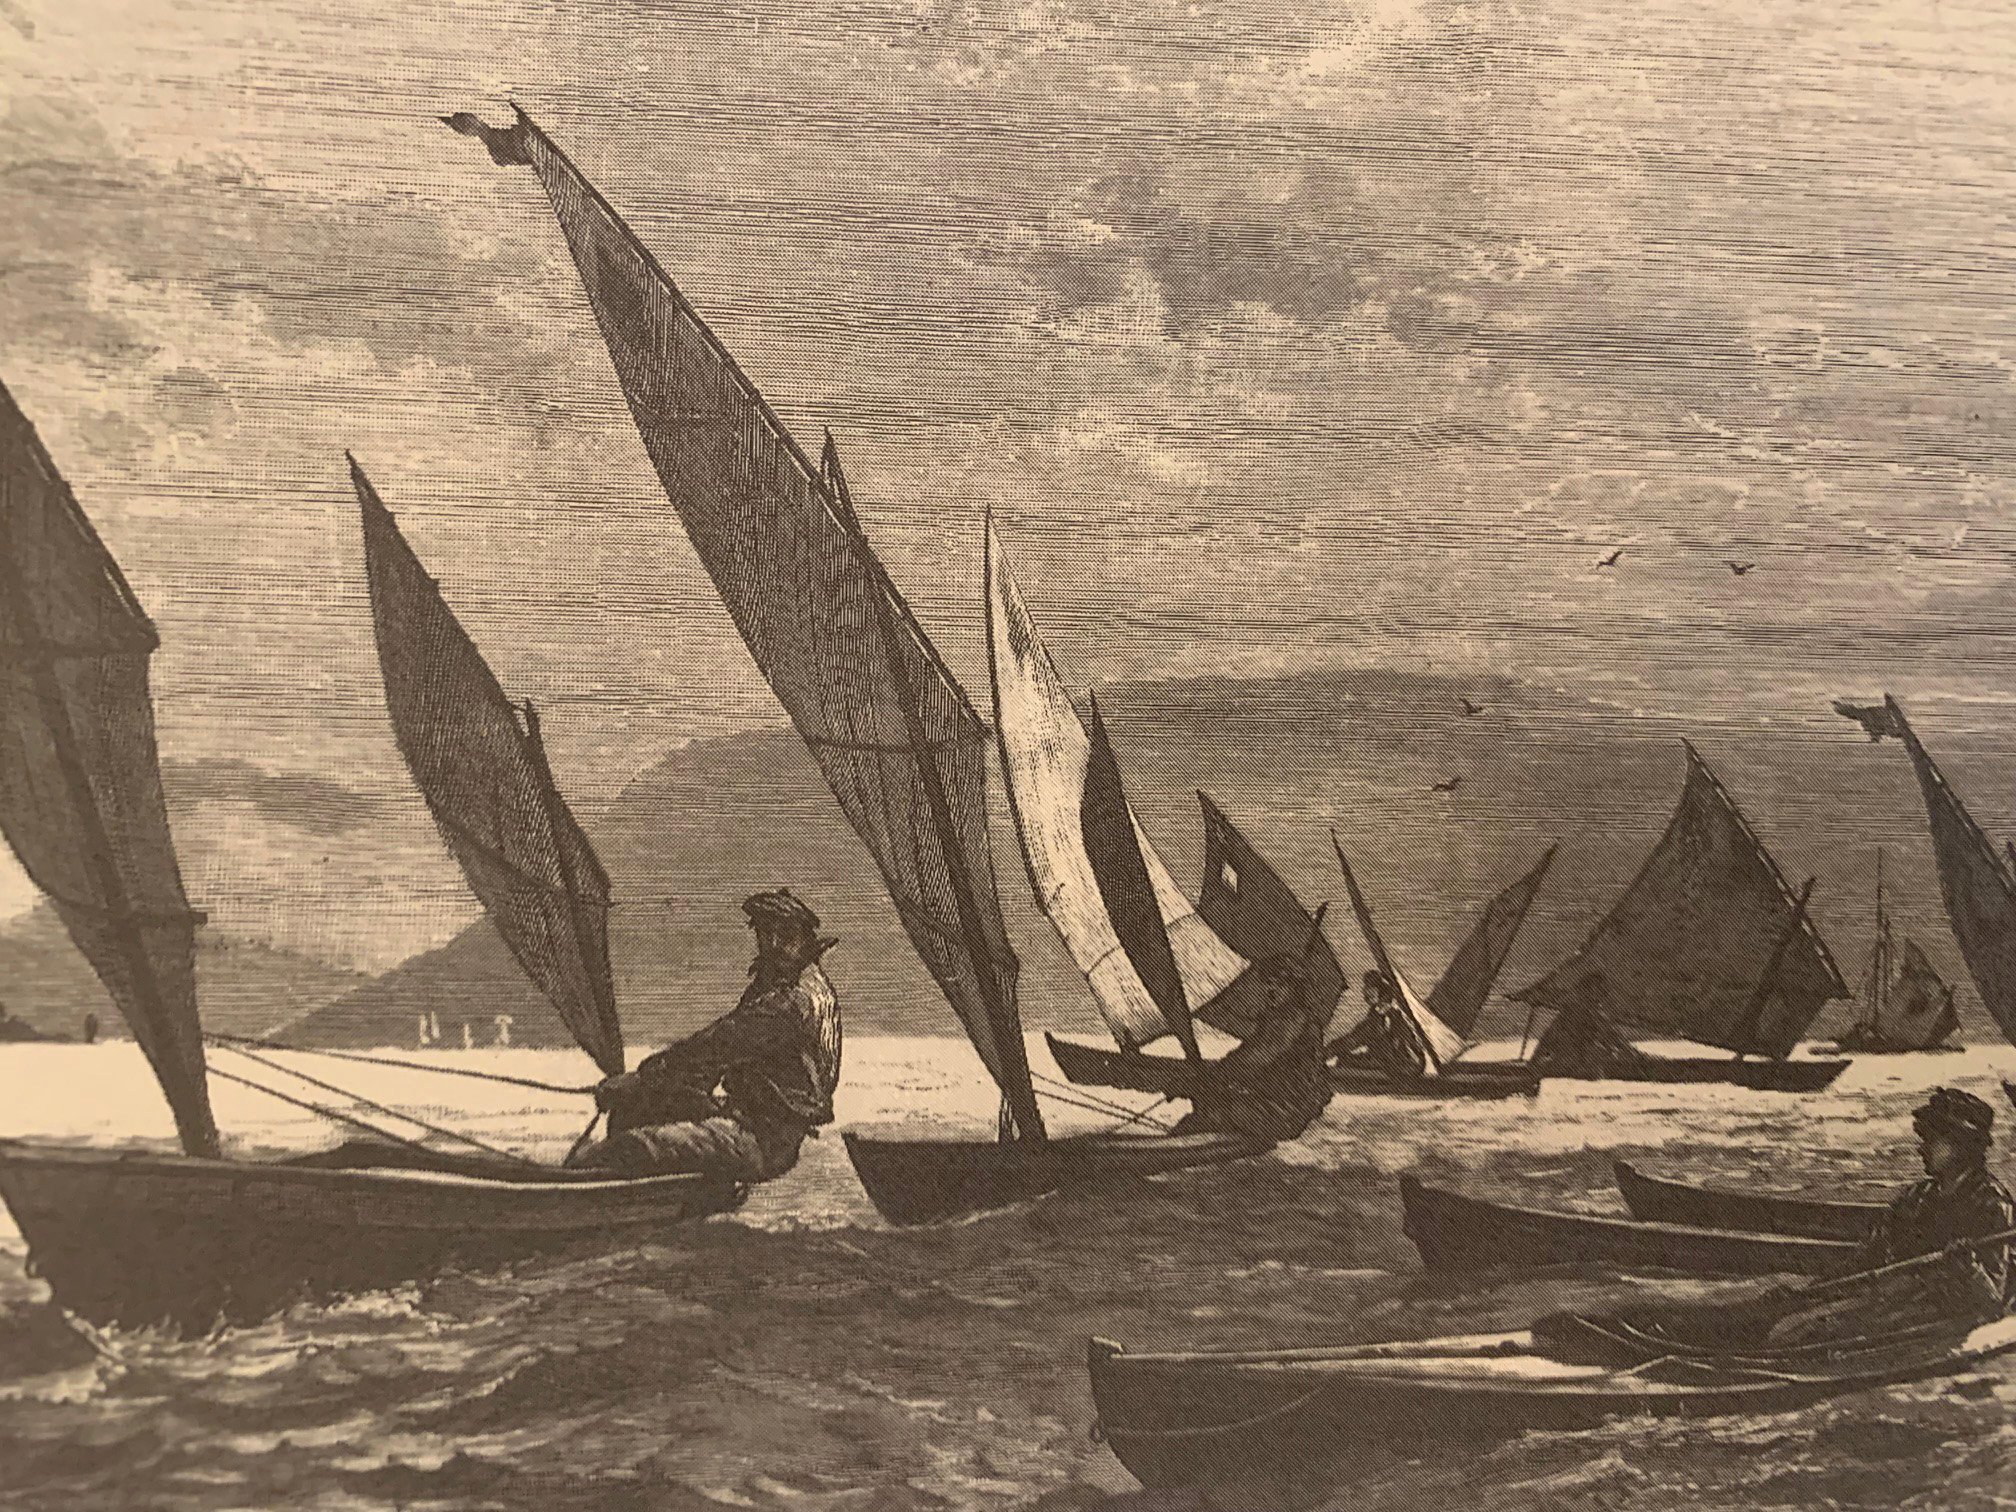 Story Boats: Watercraft tales teach us classic boat history.